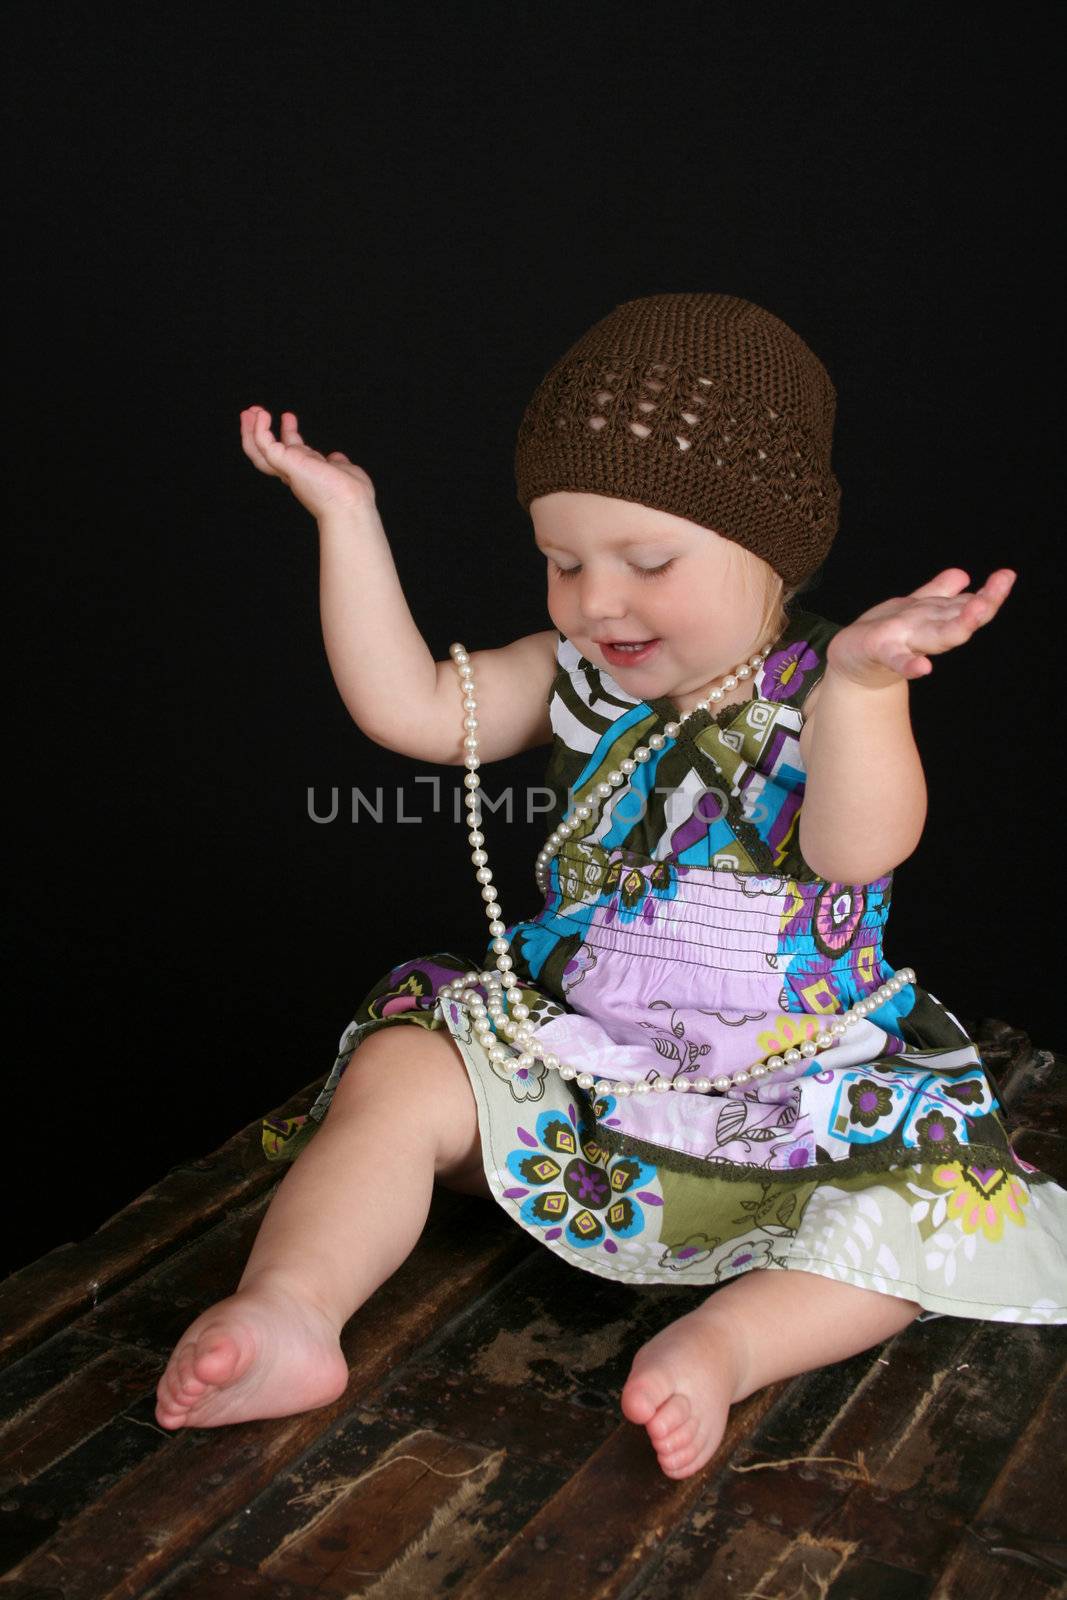 Beautiful blond toddler playing with a string of pearls